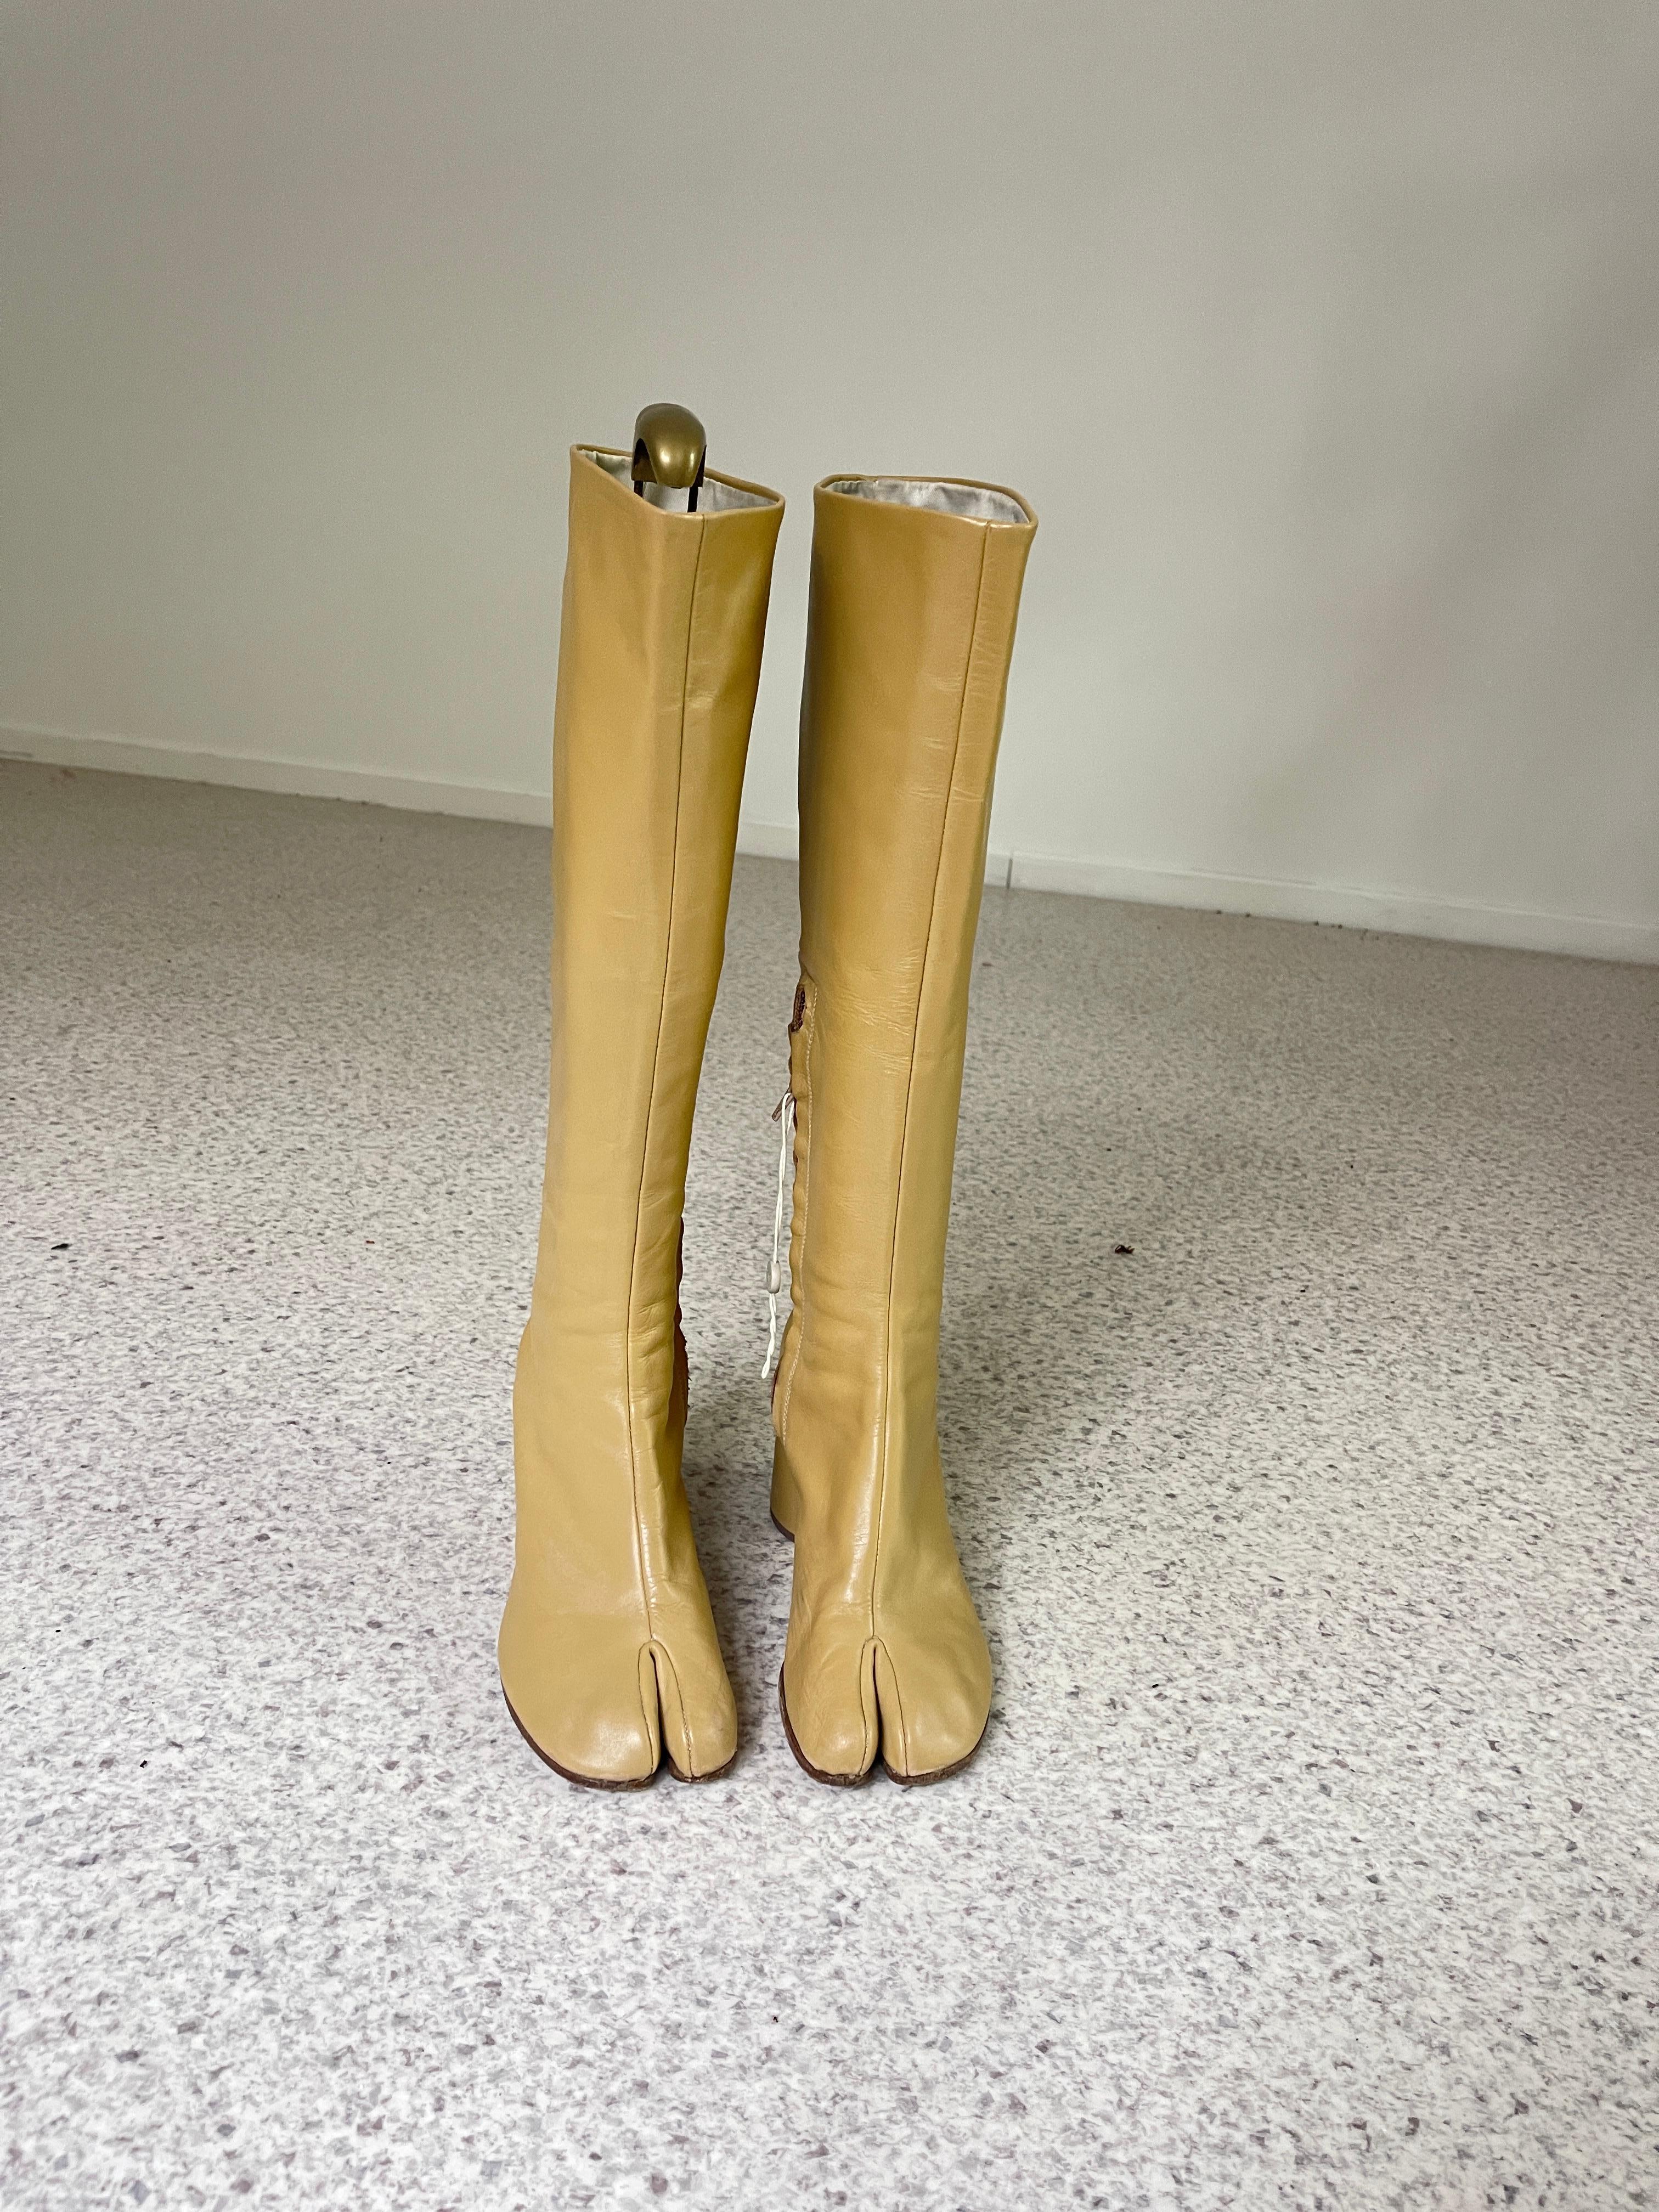 Margiela Tabi Knee High Boots 2004 look book collection  Beige  Leather  EU 38  For Sale 1